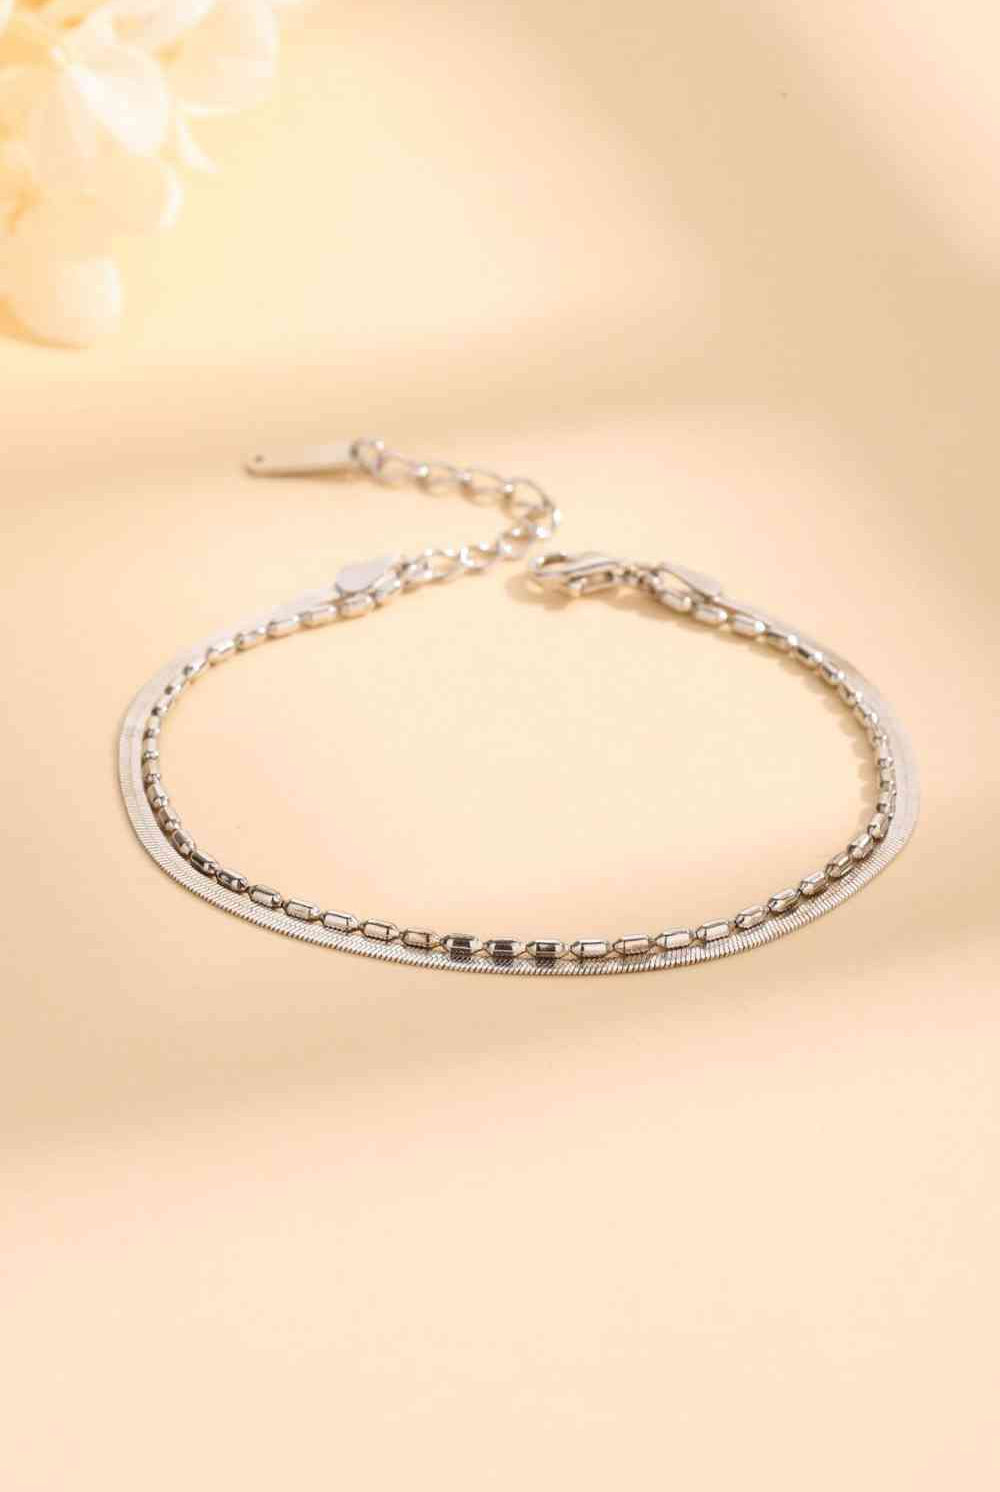 Double-Layered 925 Sterling Silver Bracelet - GemThreads Boutique Double-Layered 925 Sterling Silver Bracelet